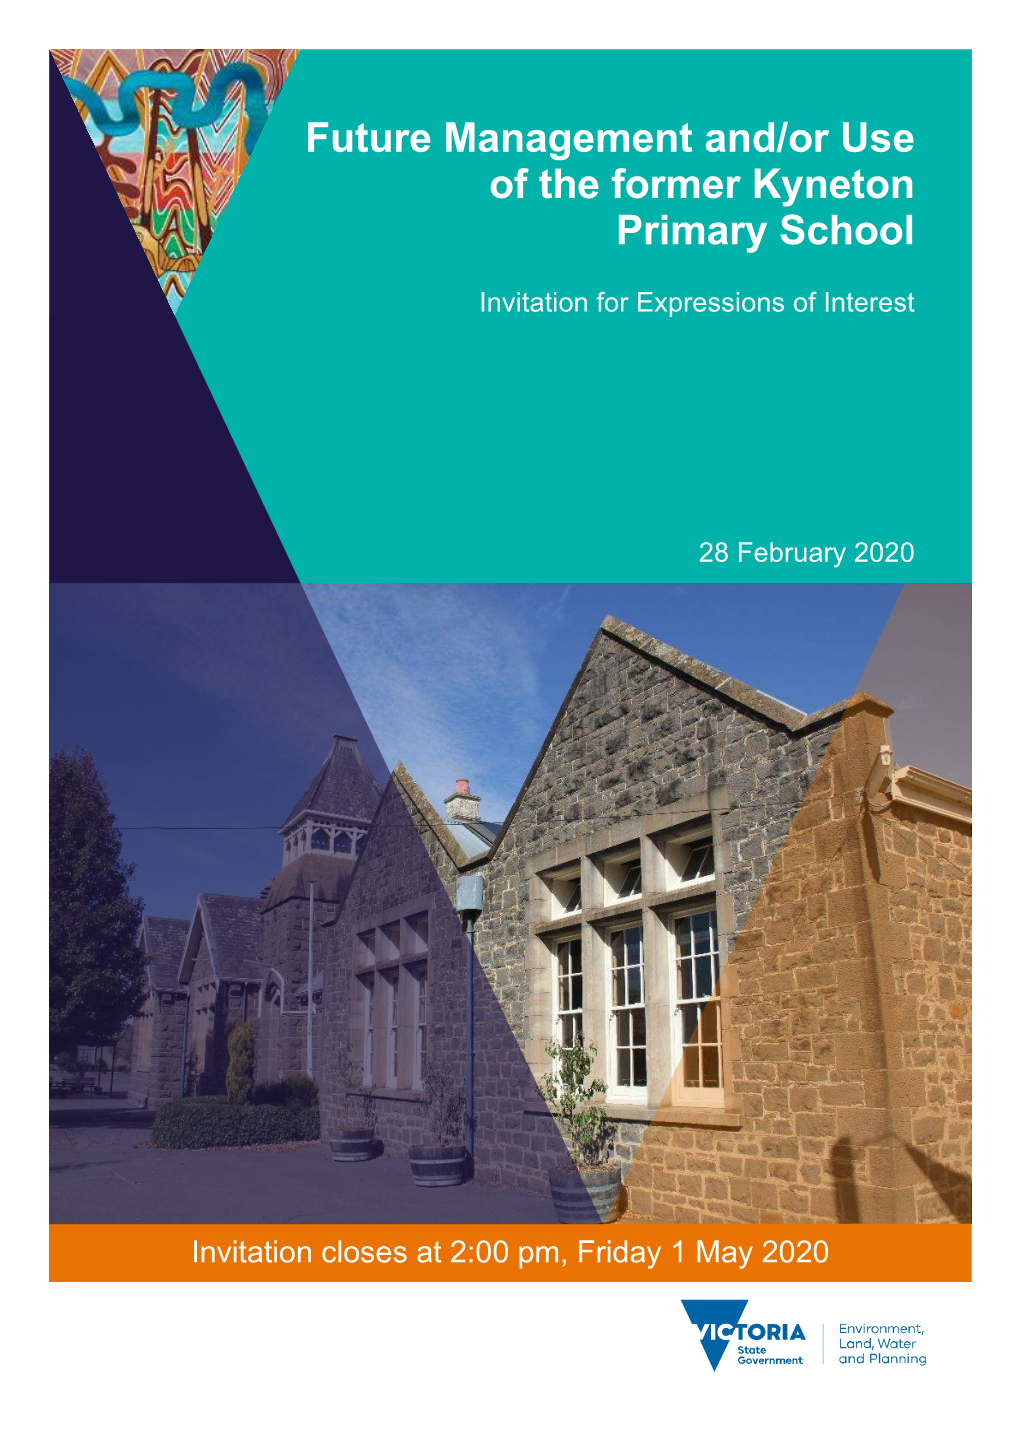 Future Management And/Or Use of the Former Kyneton Primary School